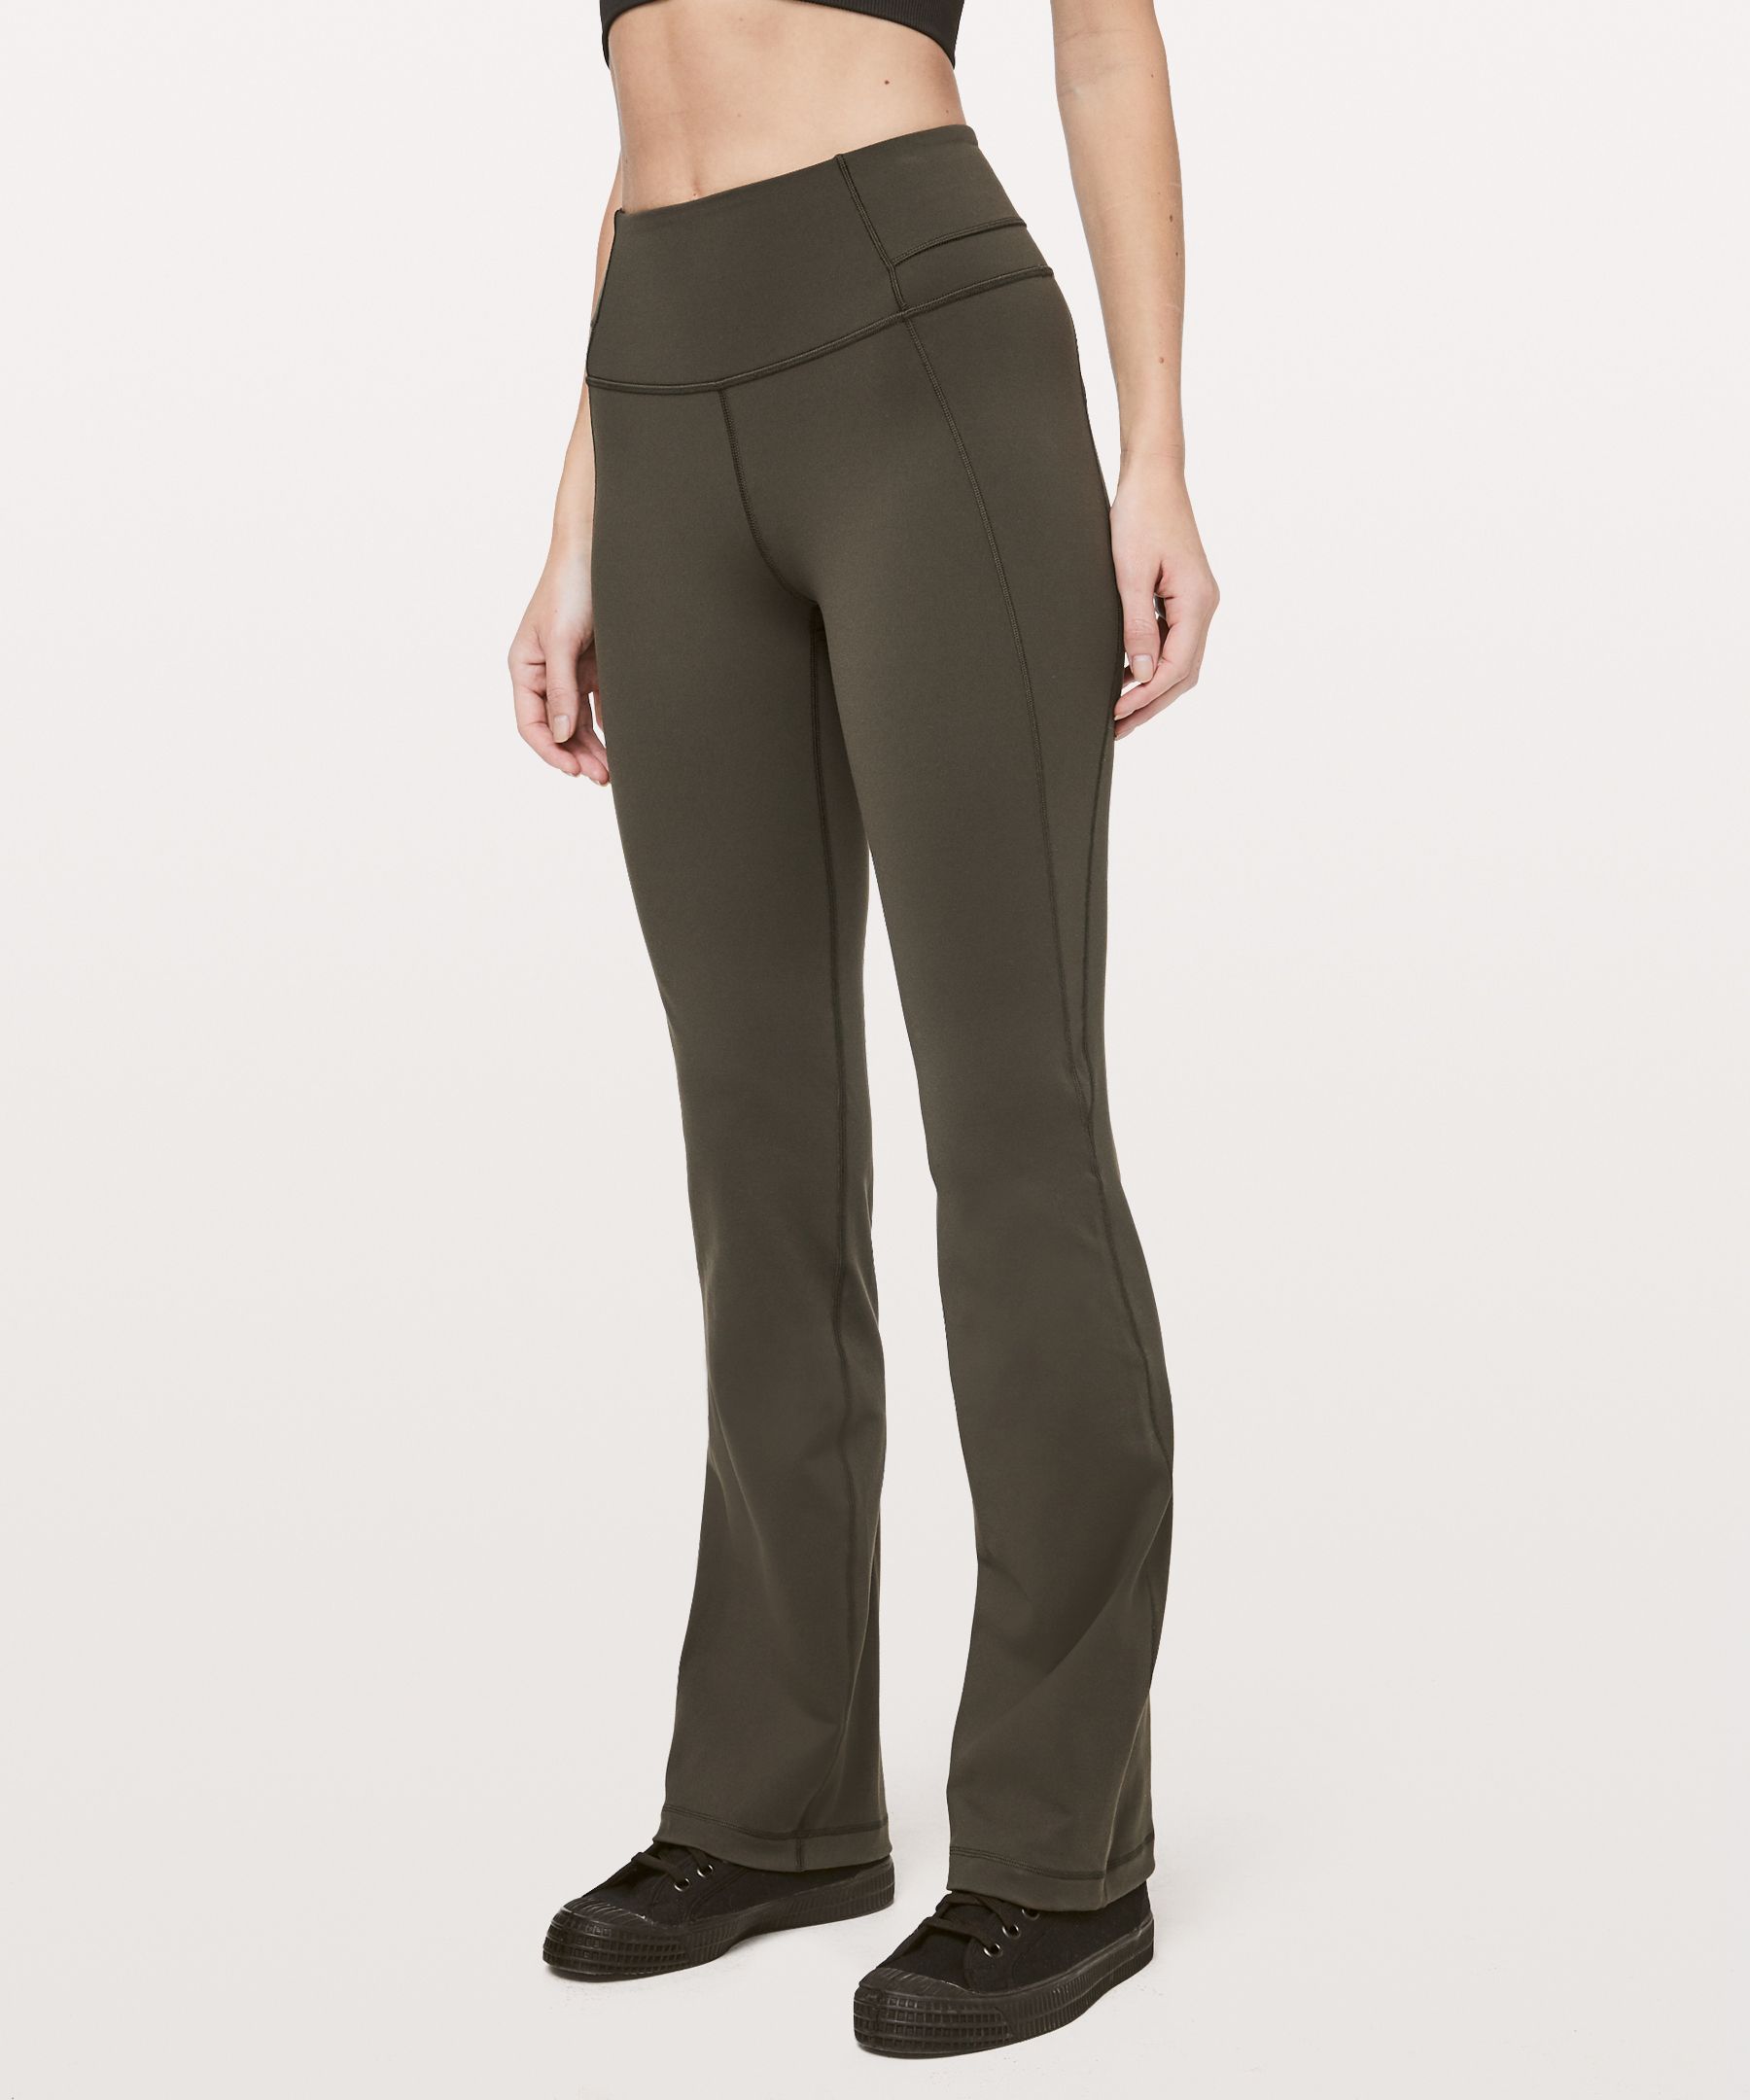 groove pant straight